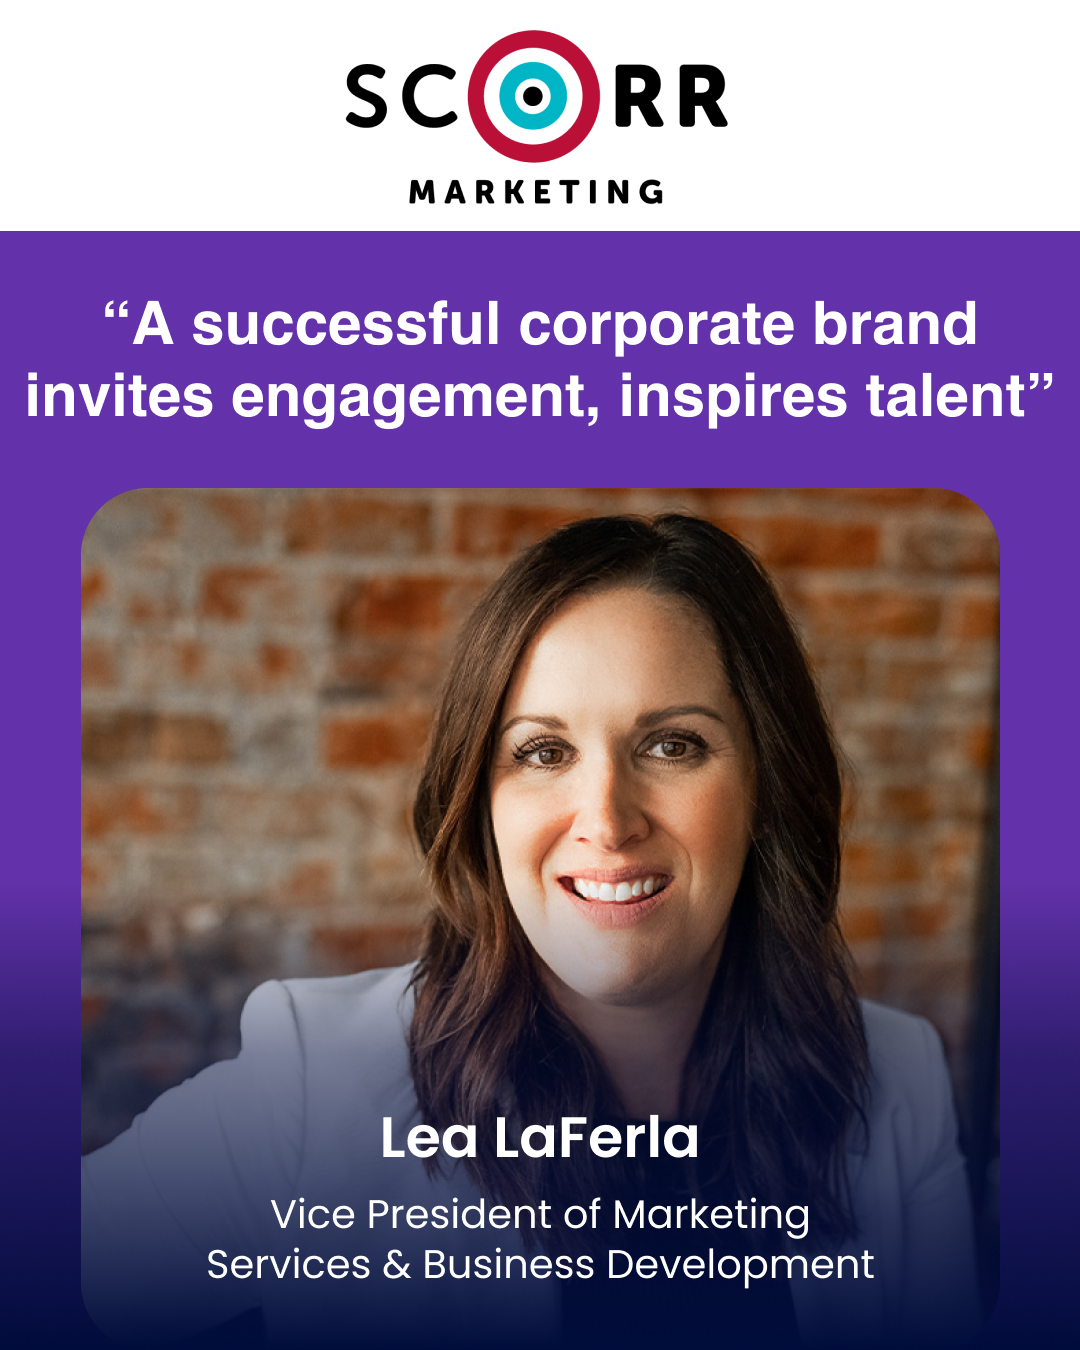 “A successful corporate brand invites engagement, inspires talent”